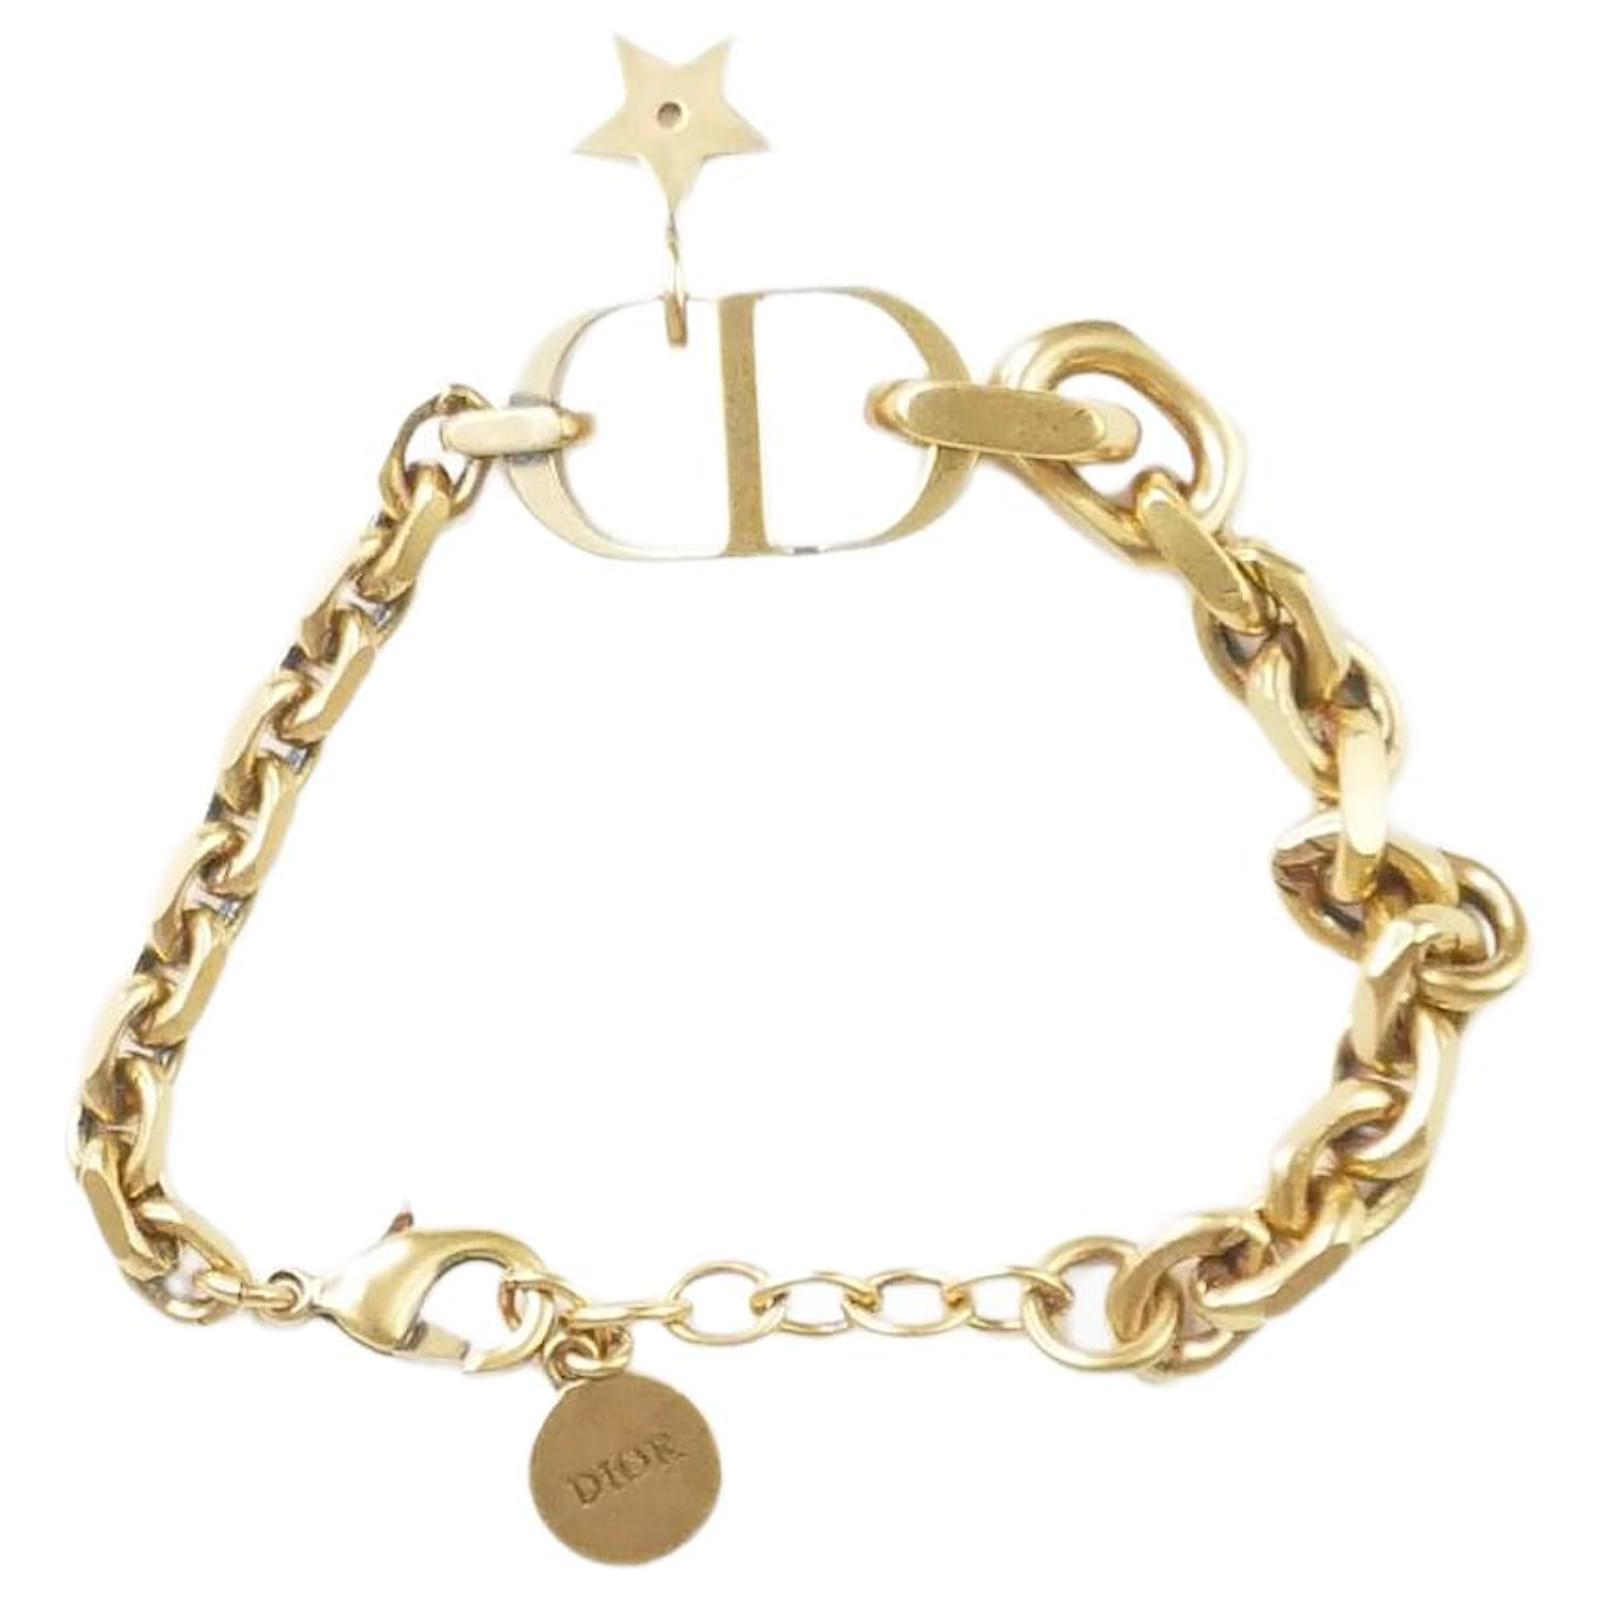 Christian Dior Couture Chain Link Bracelet Silver-Finish Brass | DIOR